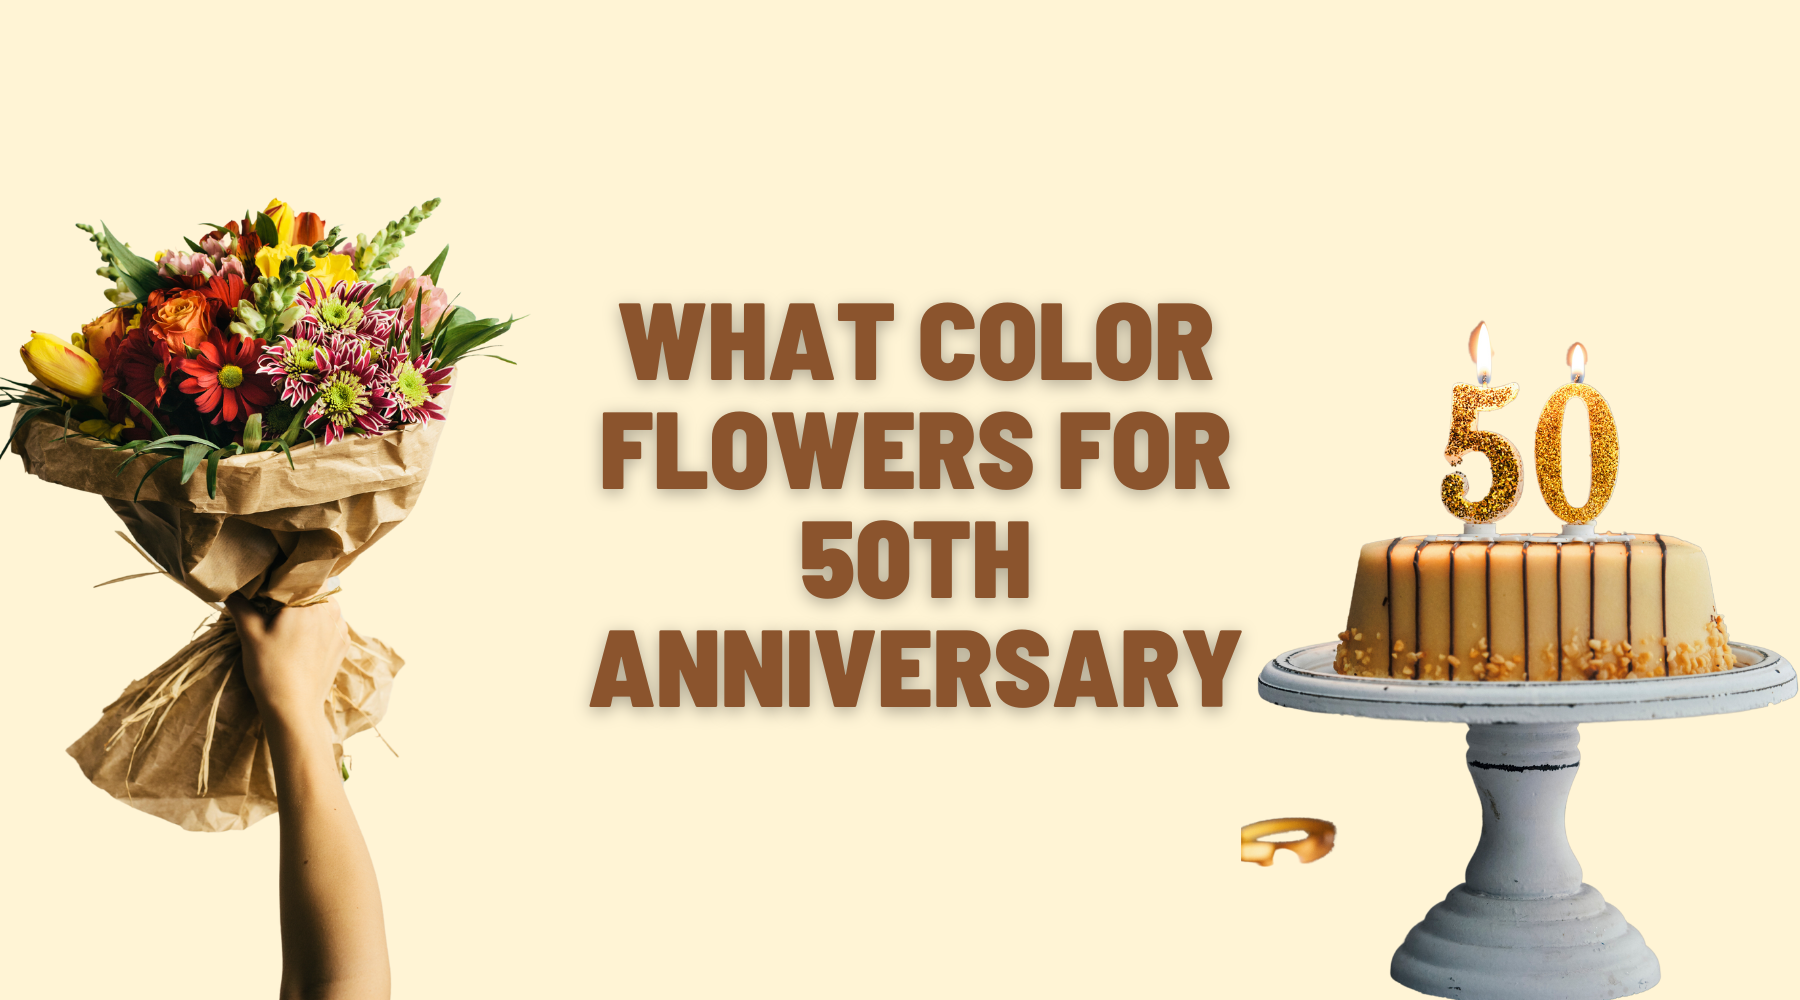 What Color Flowers For 50th Anniversary